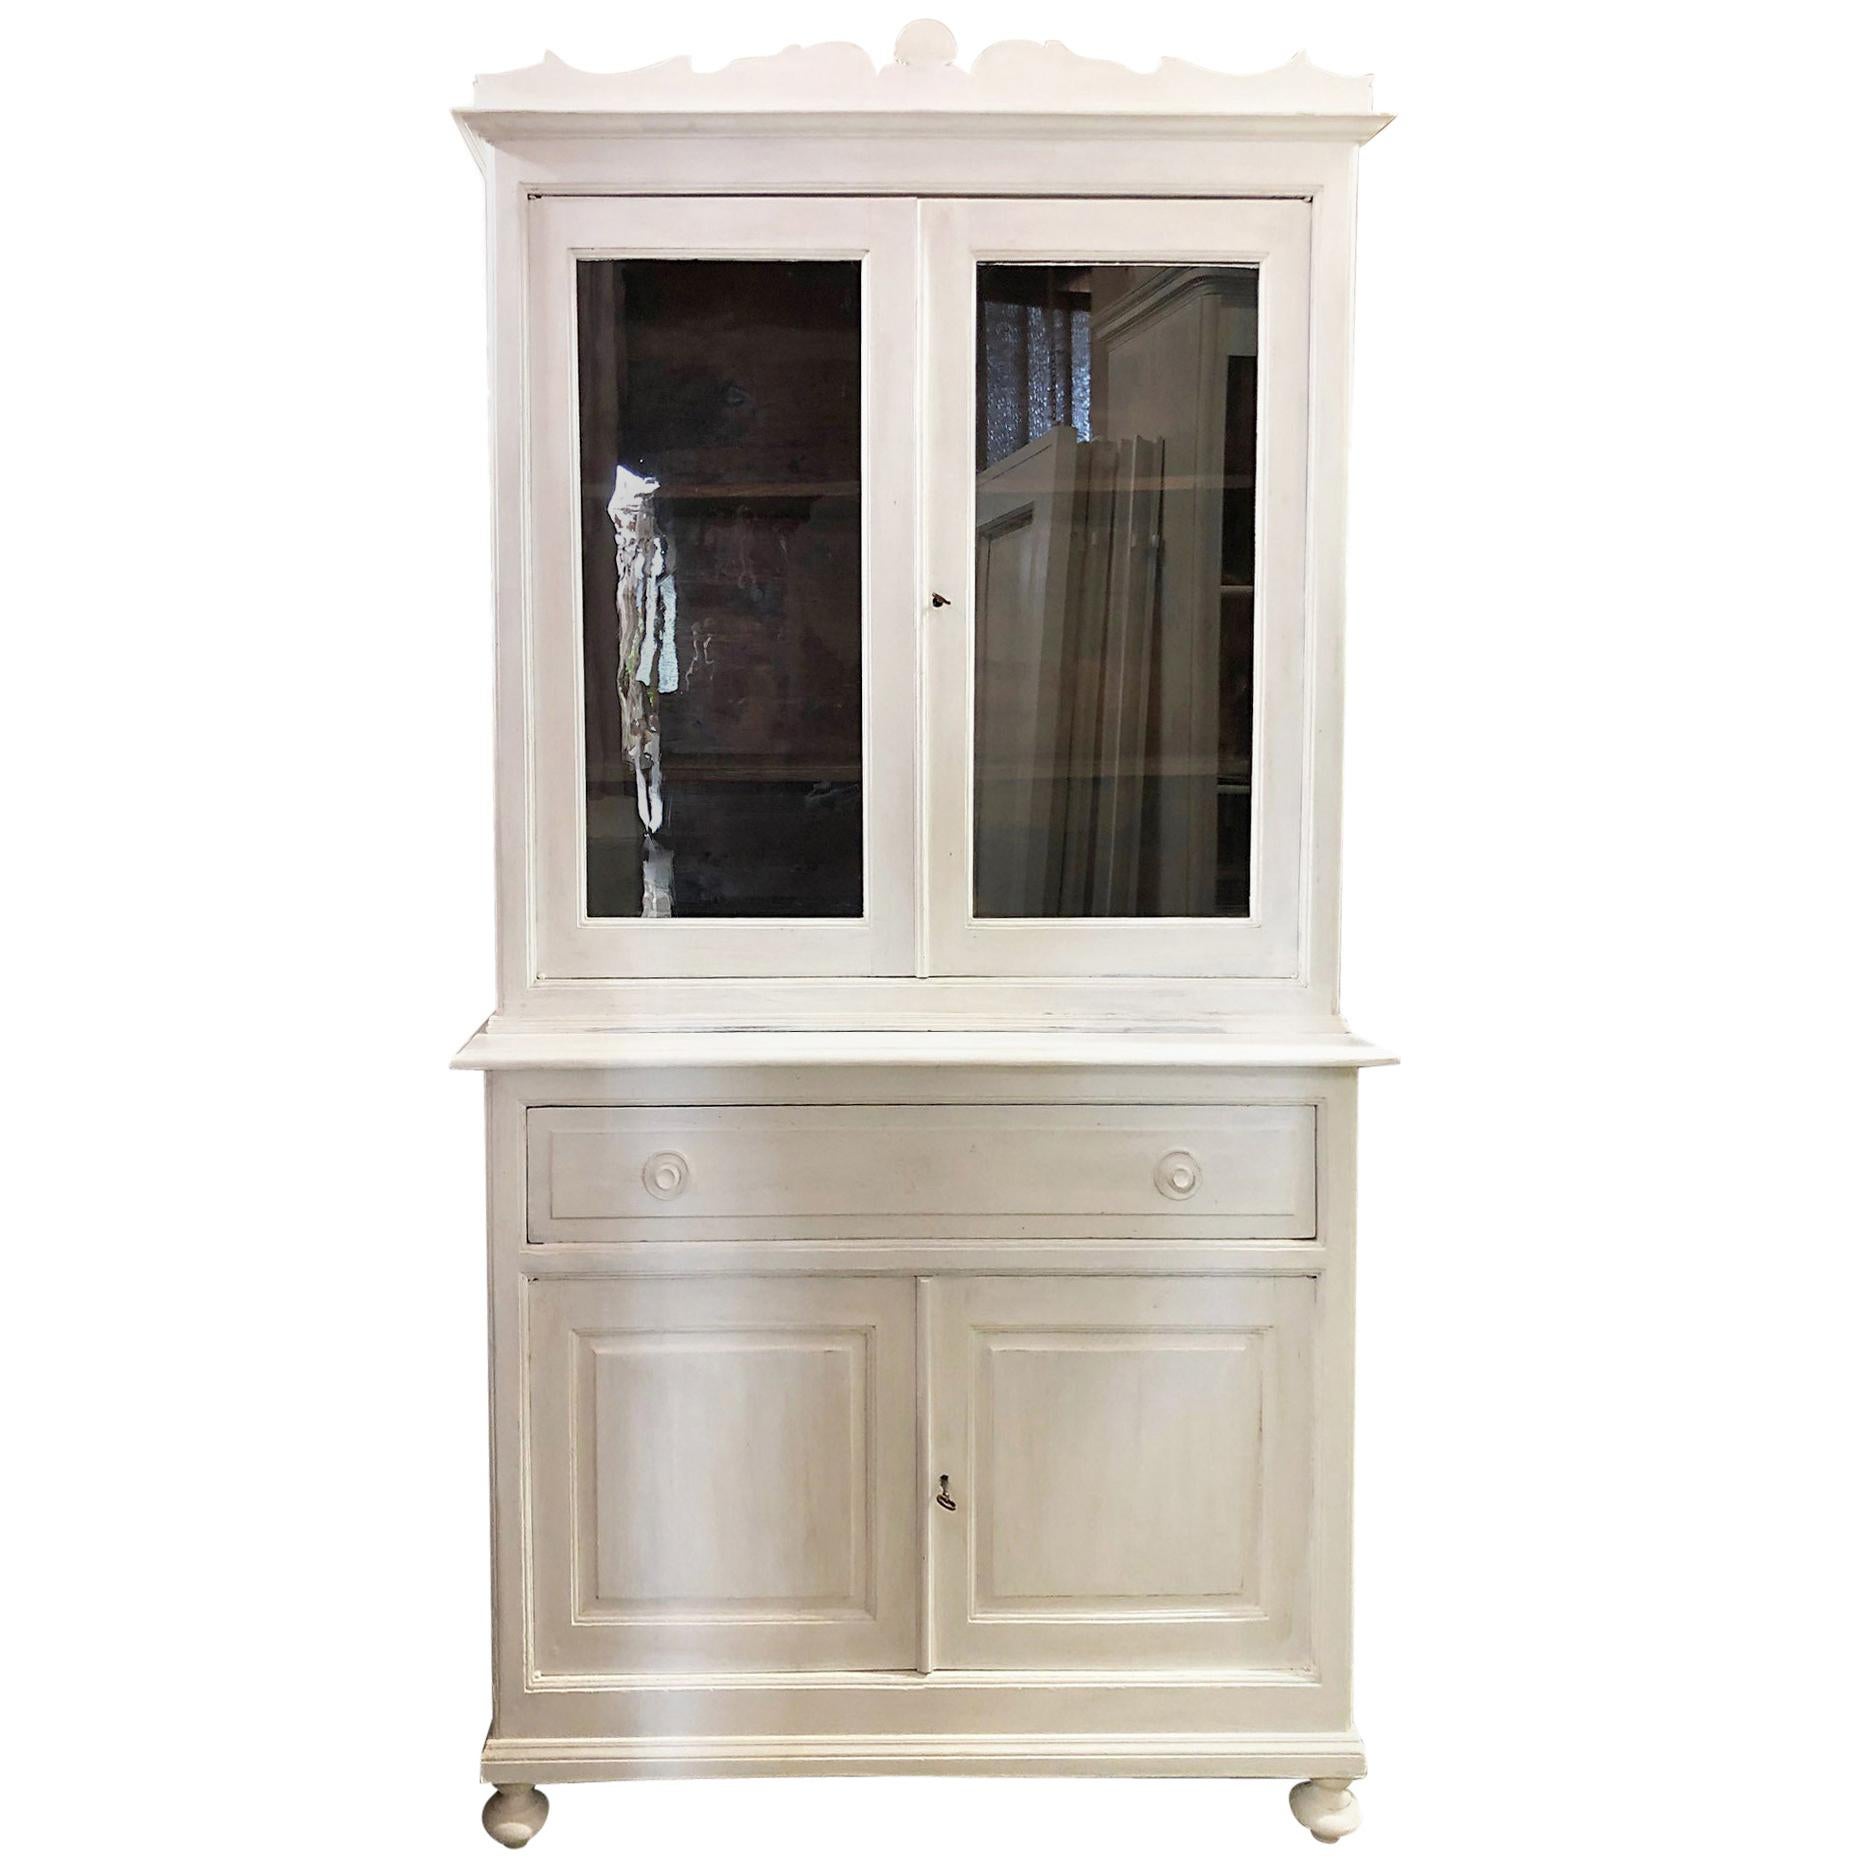 Original Tuscan Showcase from 1880 in Fir, Shabby White Color, with Period Glass